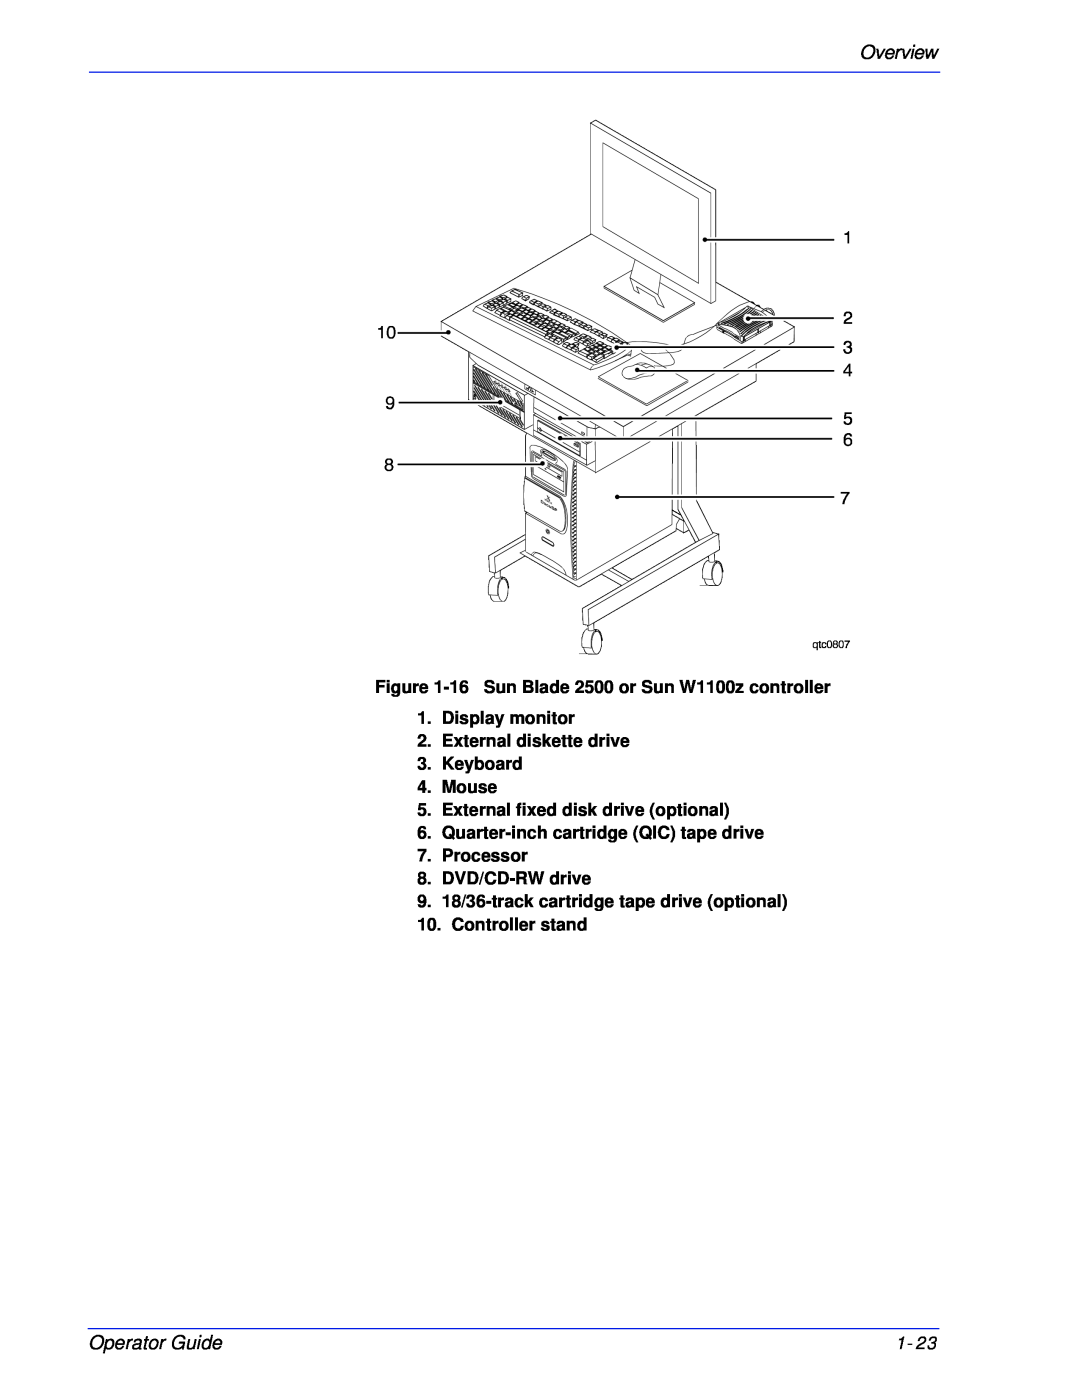 Xerox 180 EPS, 100 Overview, Operator Guide, Display monitor 2.External diskette drive, Keyboard 4.Mouse, Controller stand 